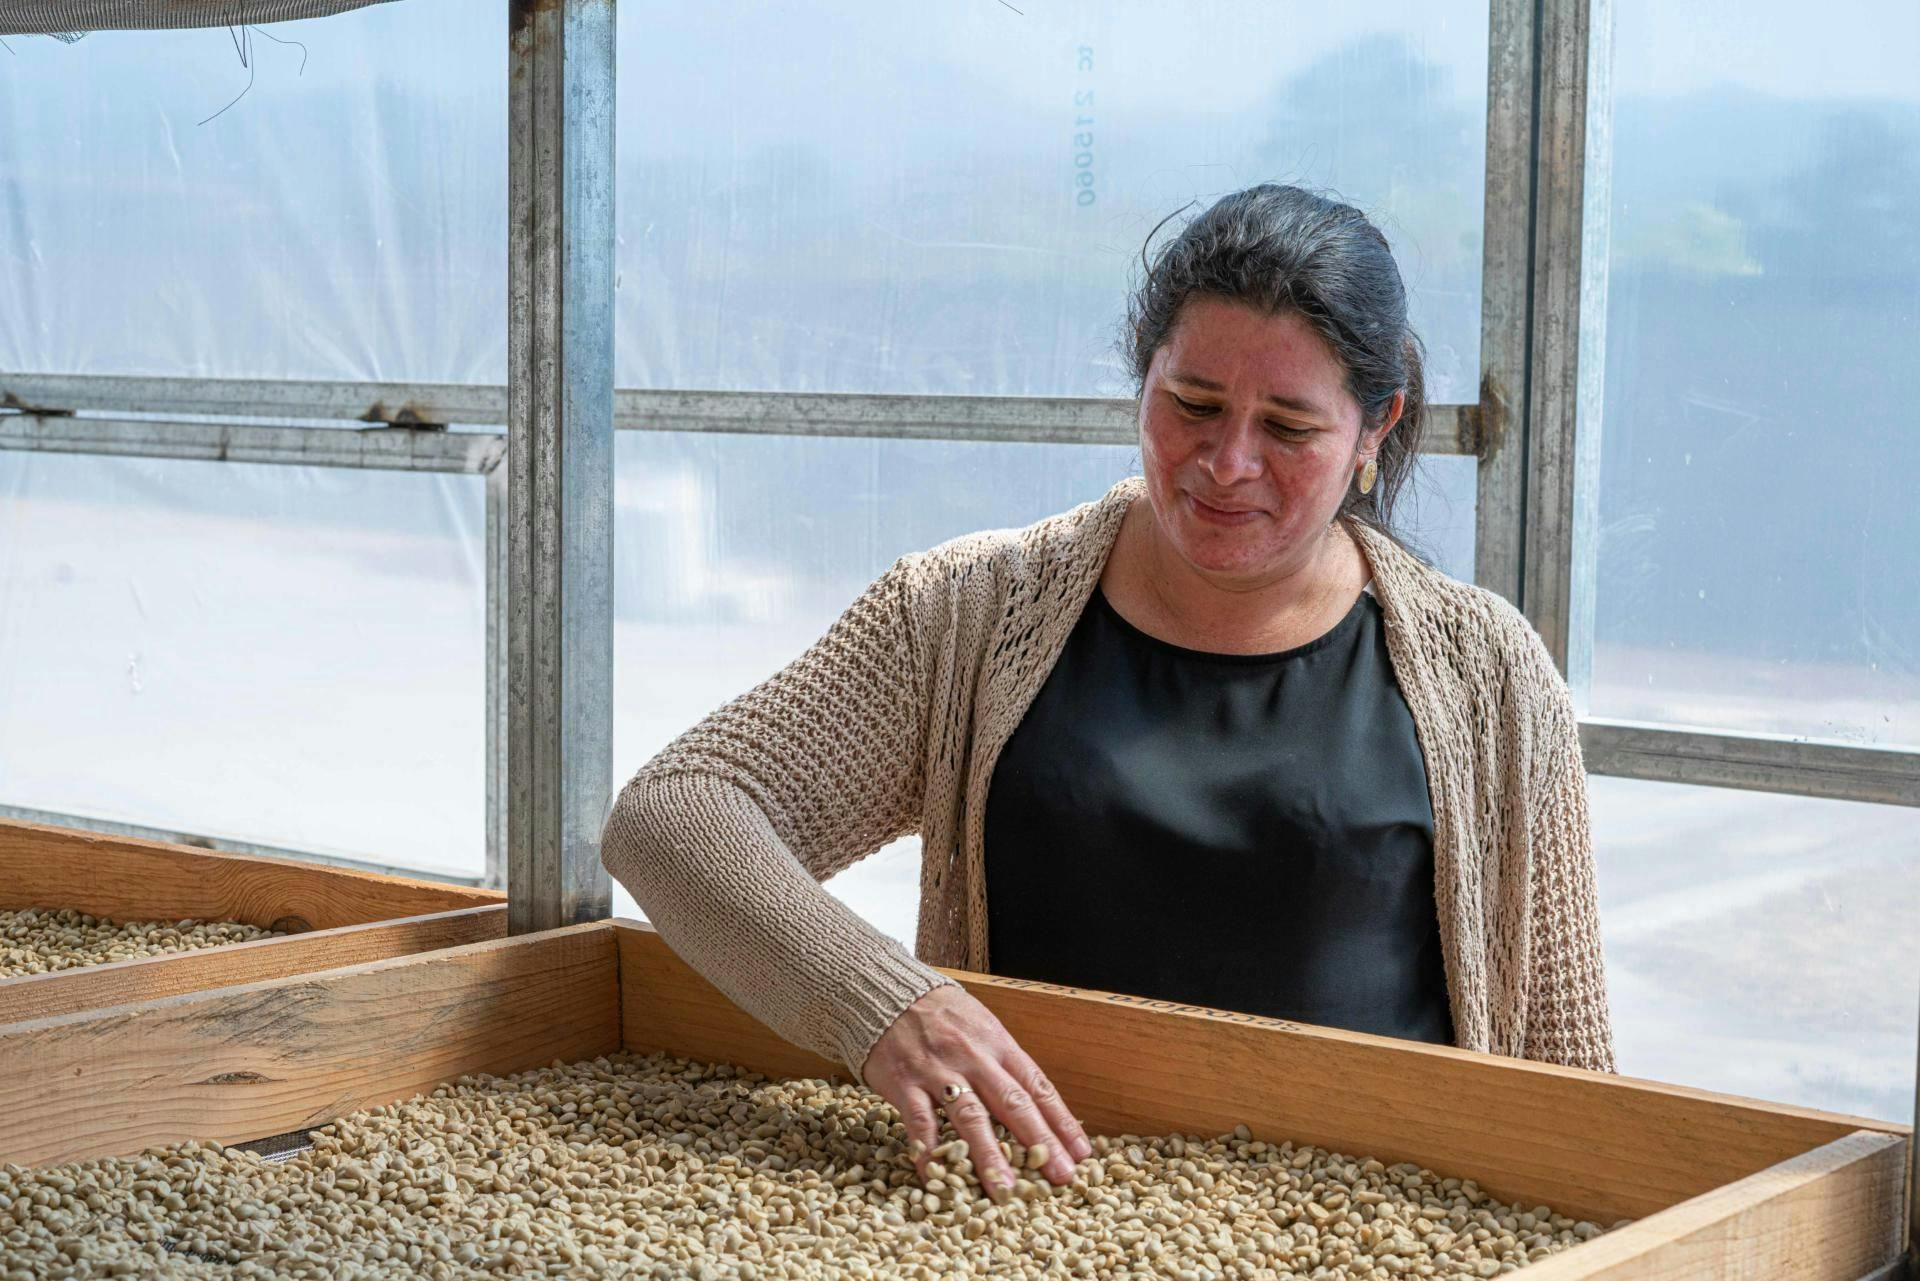 María overseeing coffee quality and commercialization in COPRANIL